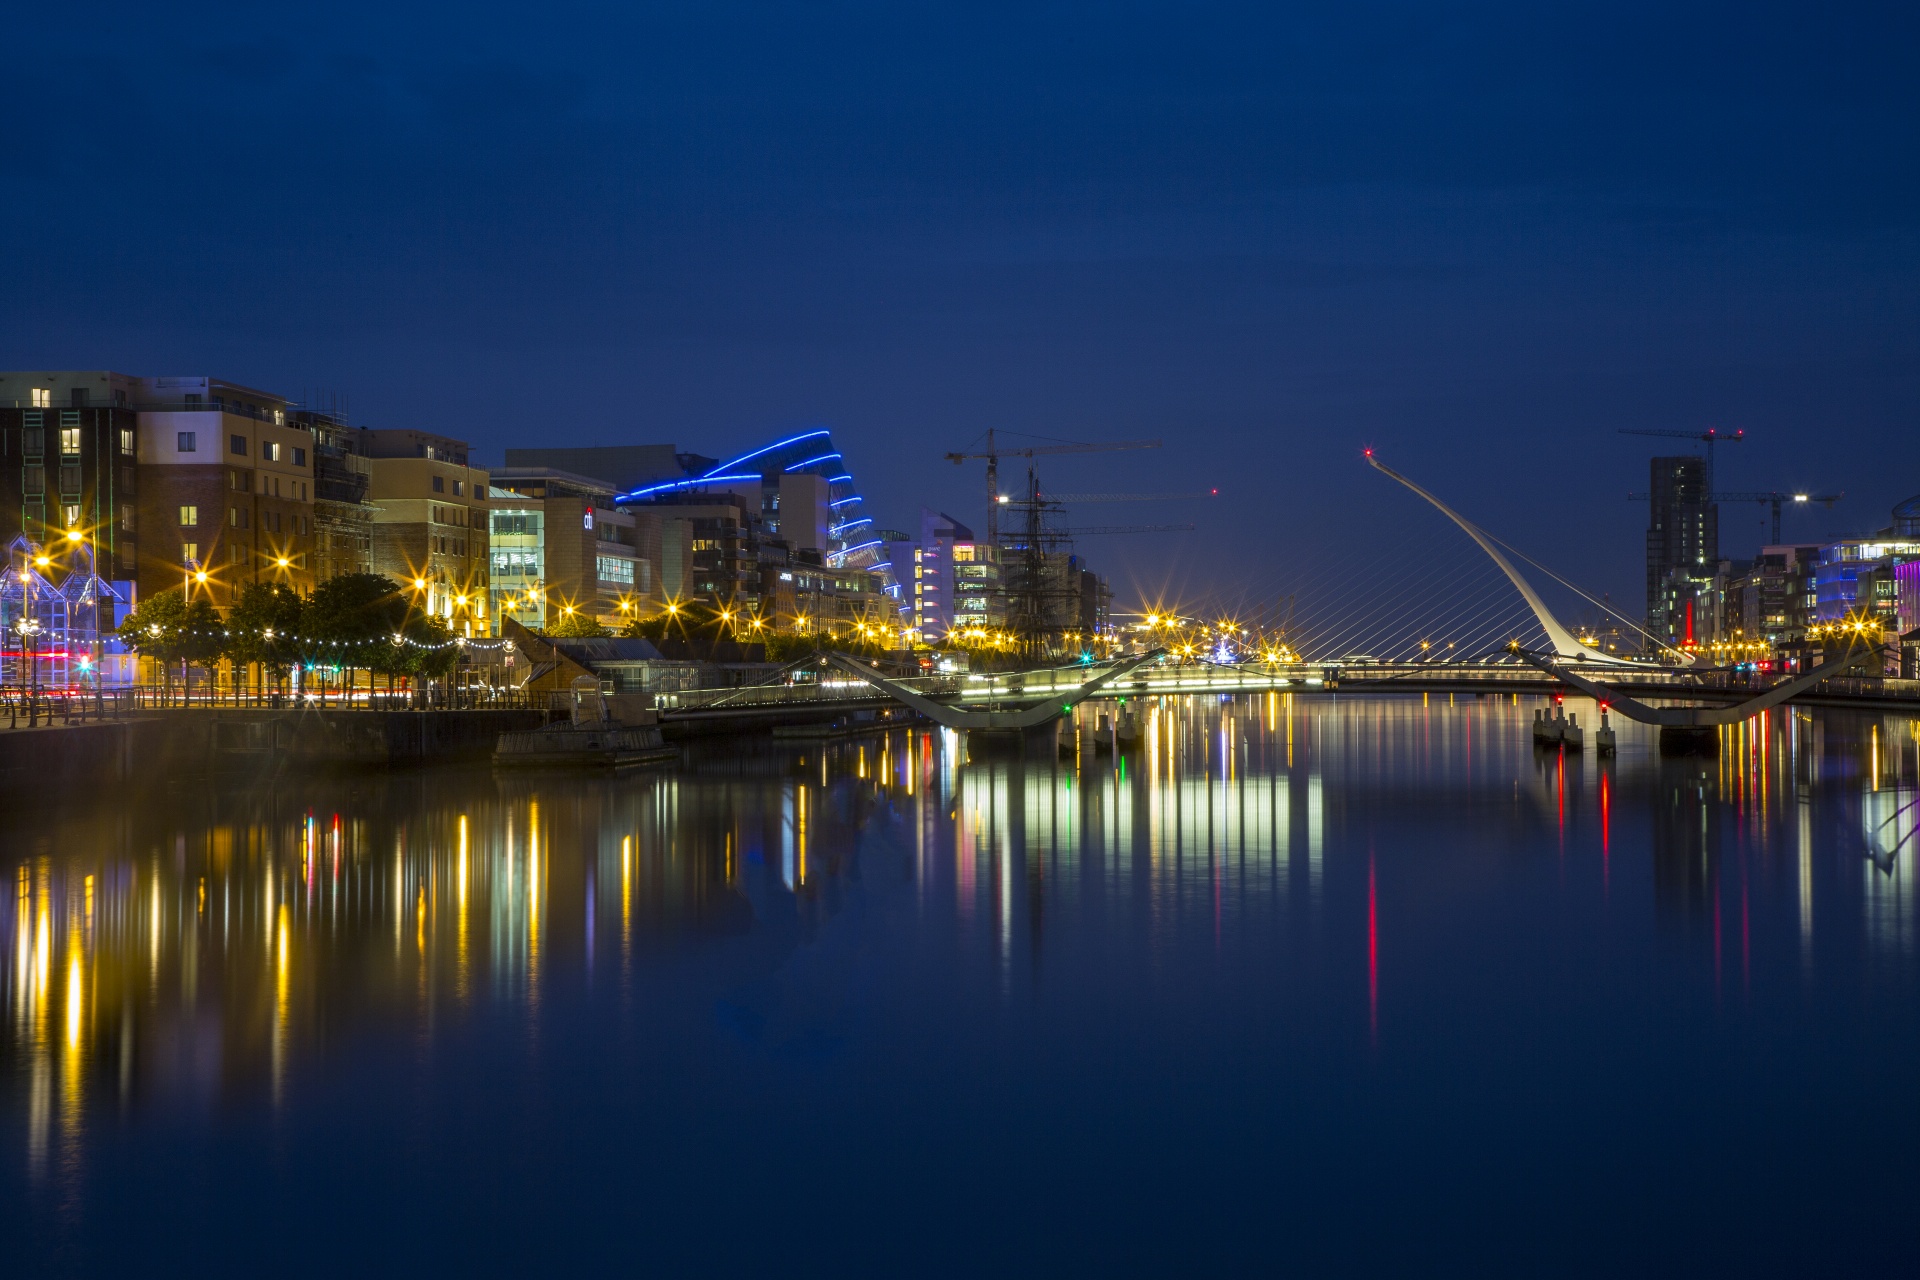 Samuel Beckett Bridge is a cable-stayed bridge in Dublin that joins Sir John Rogerson's Quay on the south side of the River Liffey to Guild Street and North Wall Quay in the Docklands area